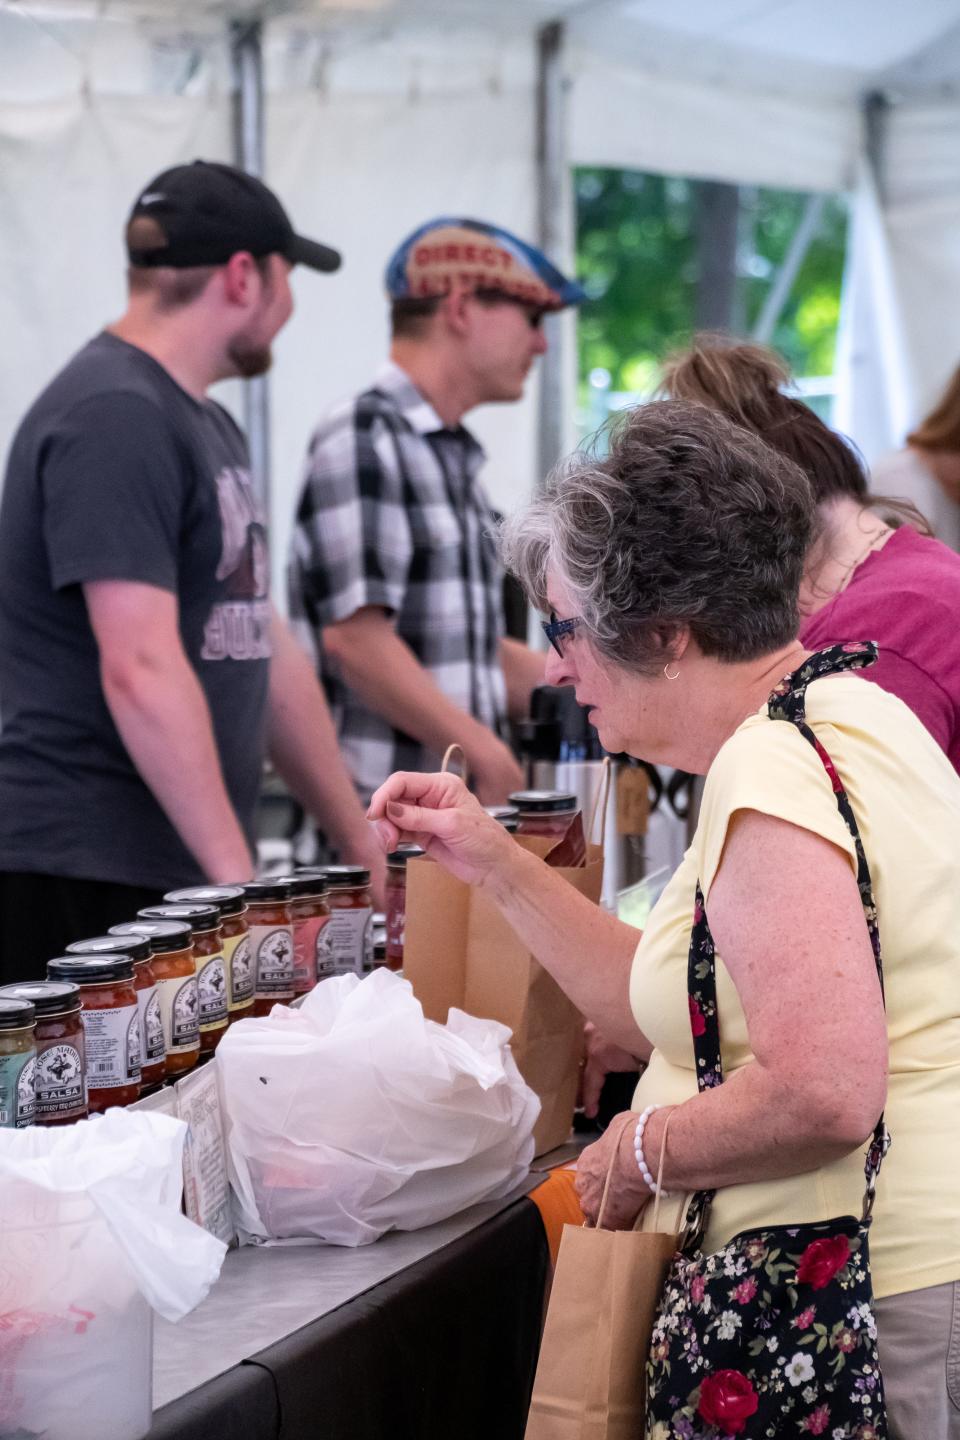 Shoppers peruse various goodies from vendors in the Marketplace Tent. Salsa, jams and jellies, and Shirley Goodpastor's famous baklava were all available to purchase.